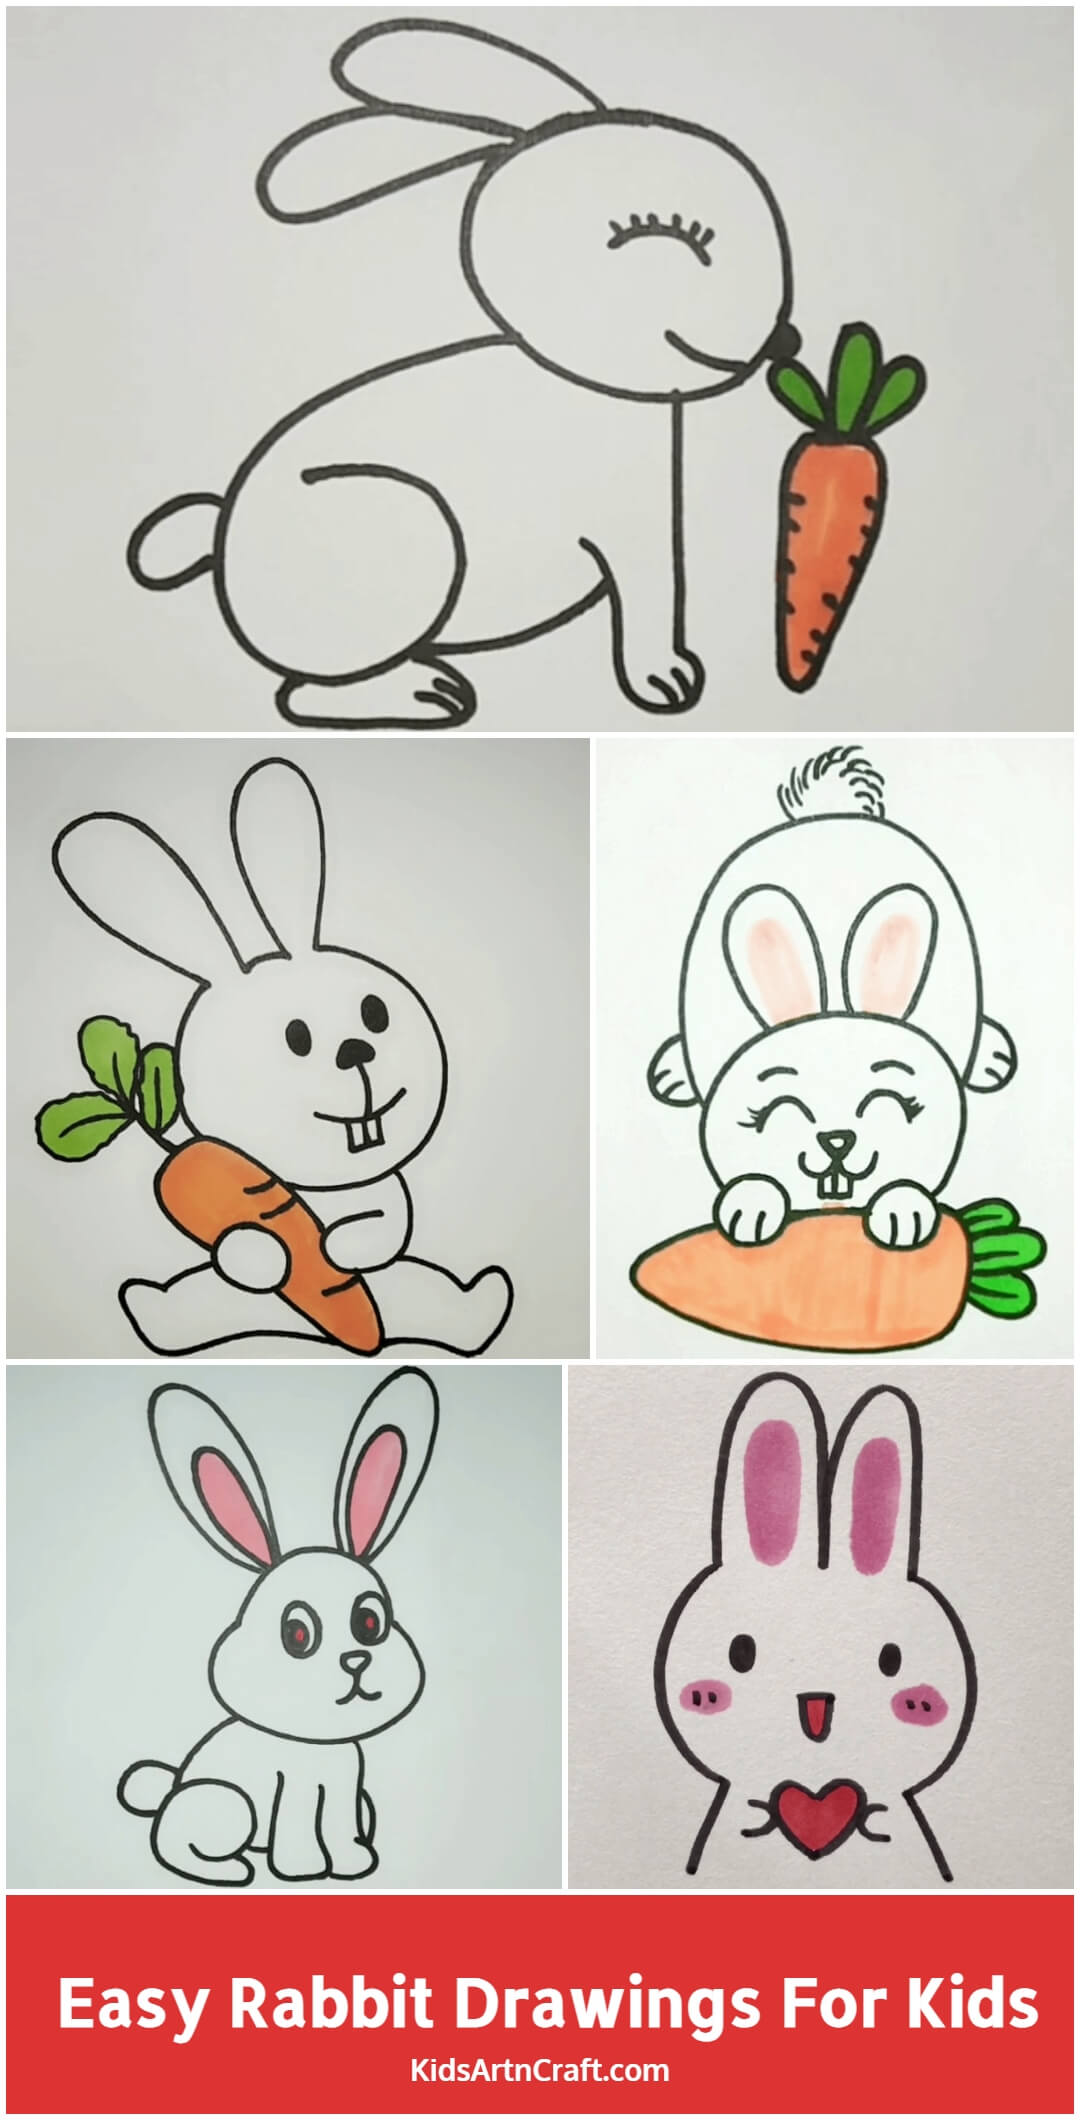 easy rabbit drawings for kids Pinterest story crafts activities f